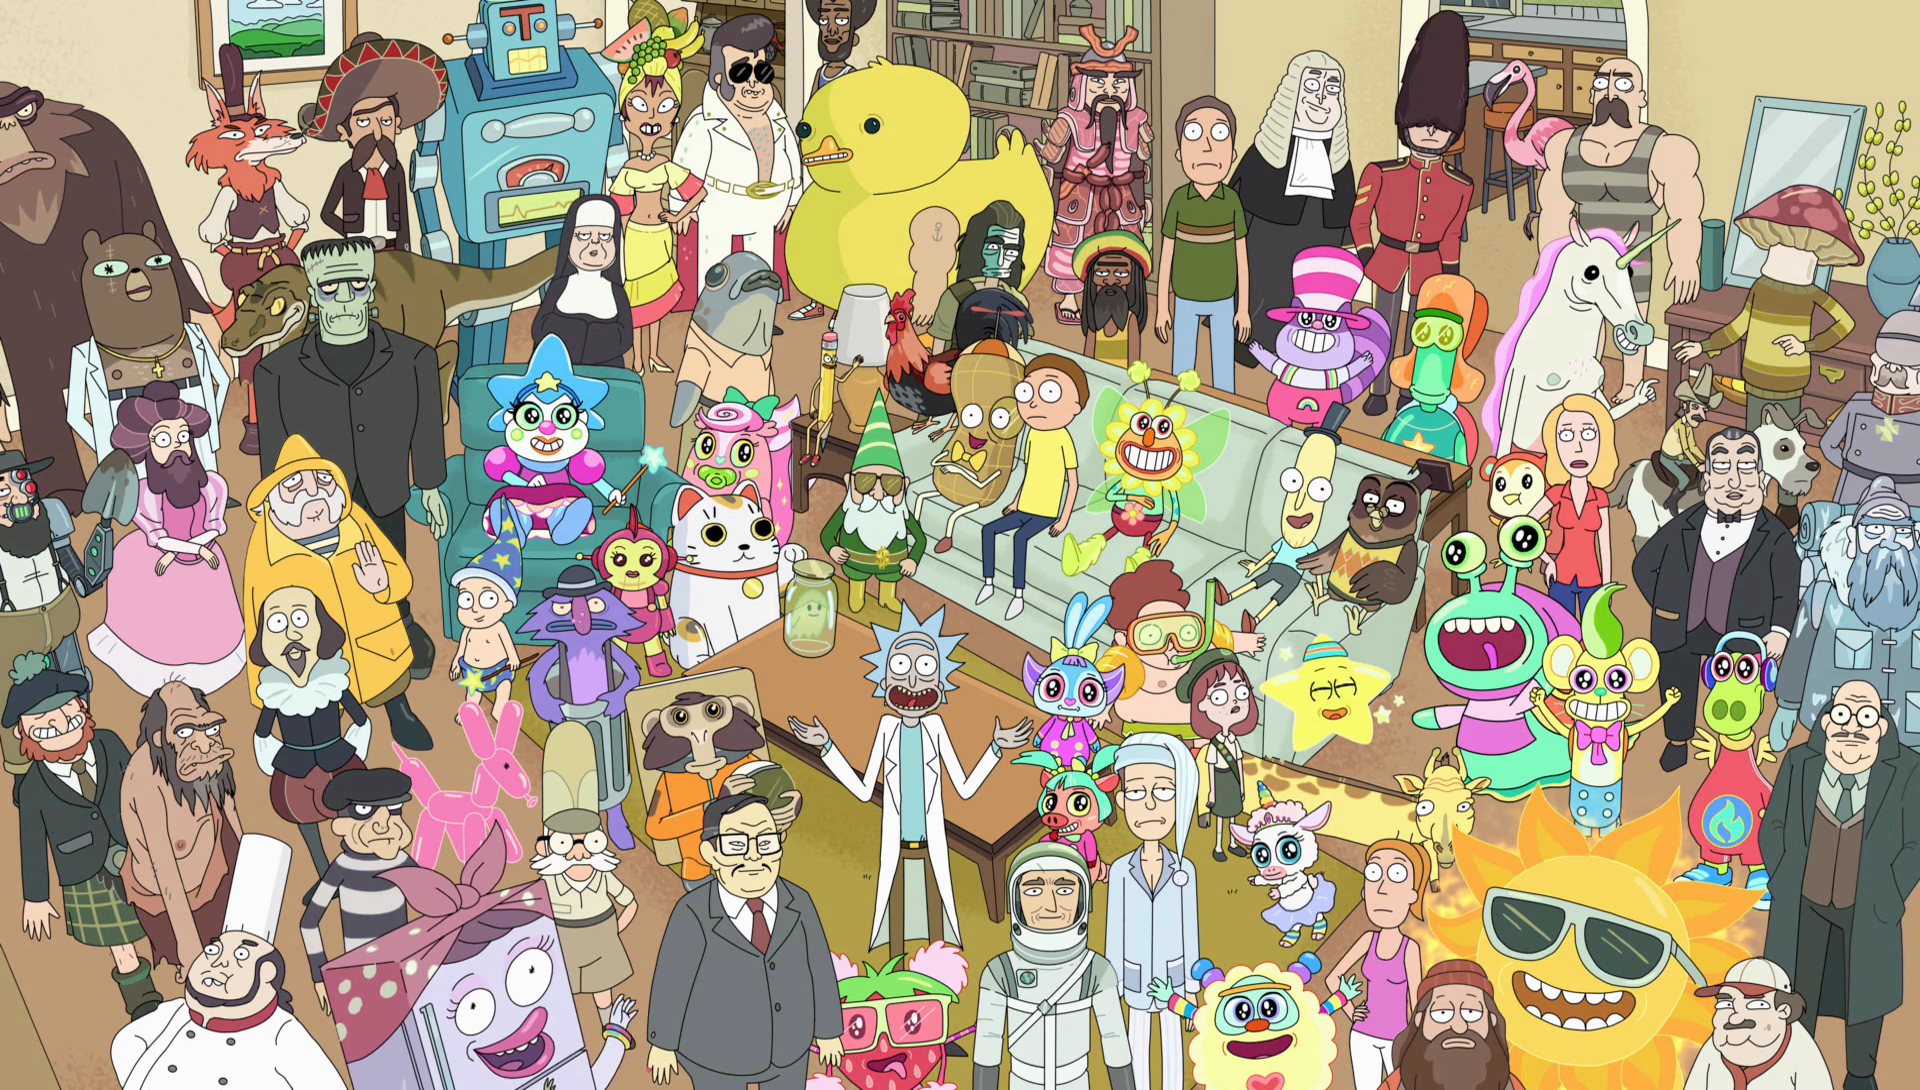 rick and morty season 2 episode 6 online